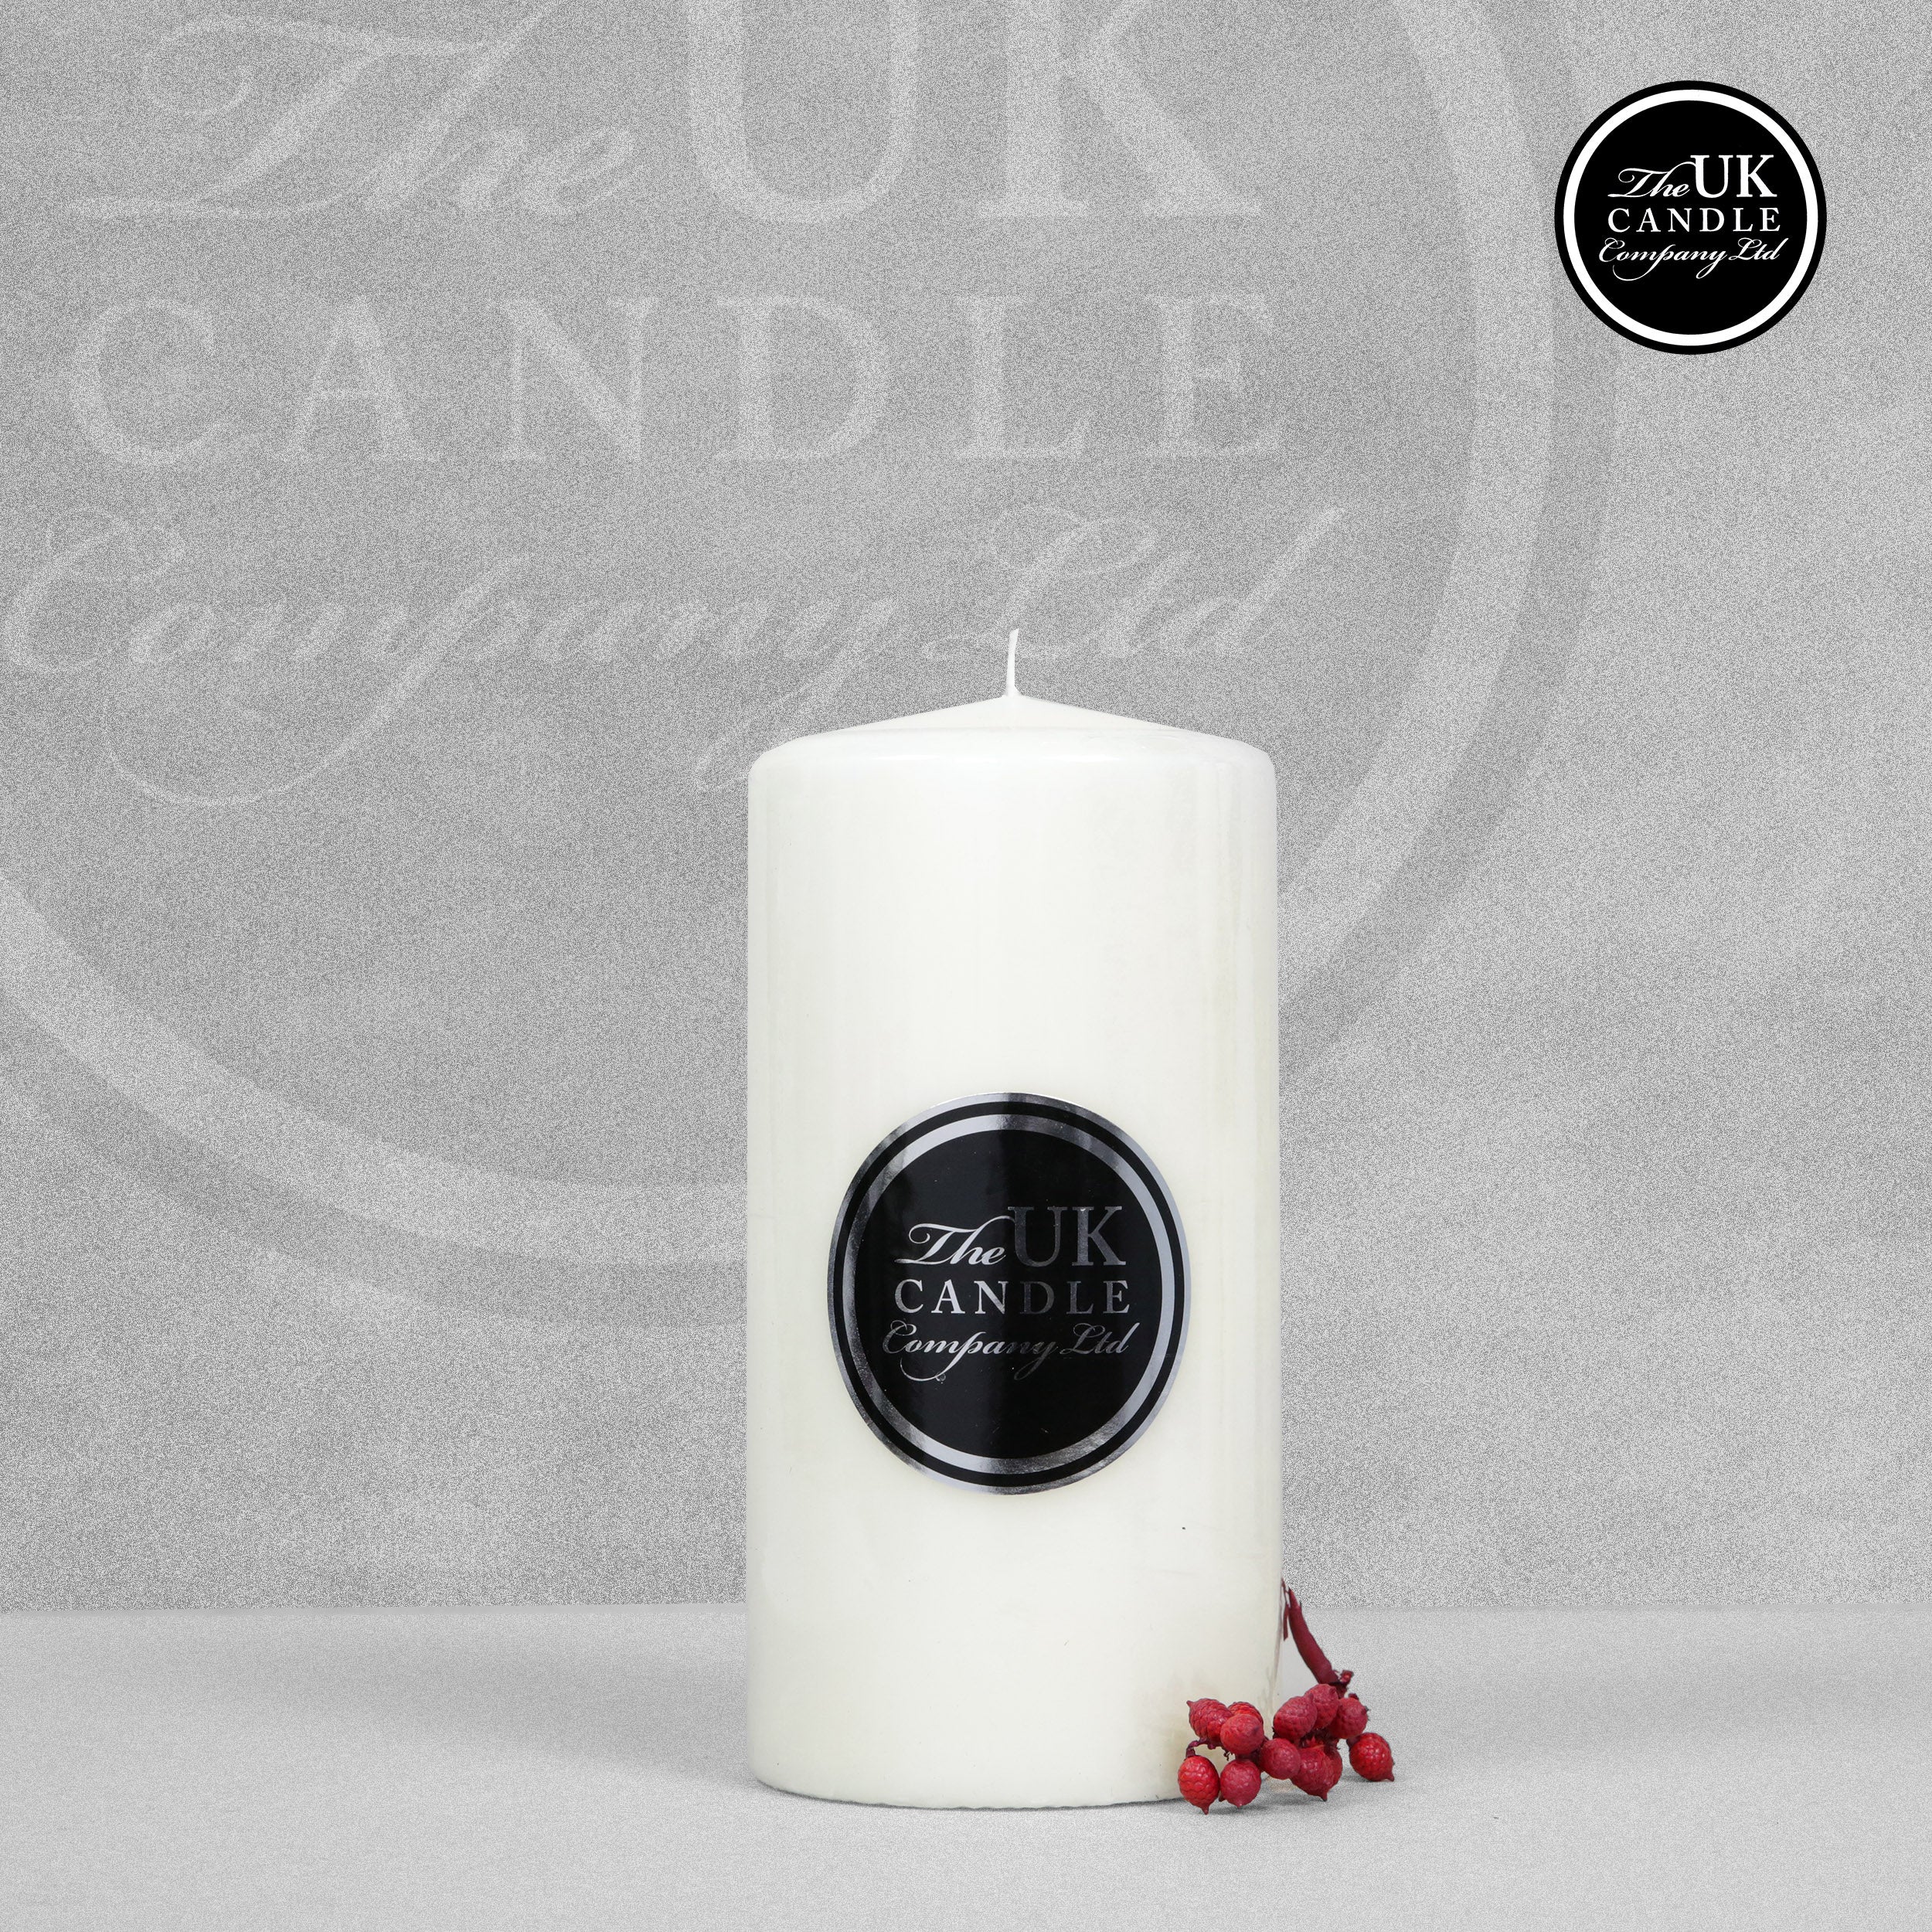 The UK Candle Company Church Pillar Candle 9.8cm x 20cm - Unscented